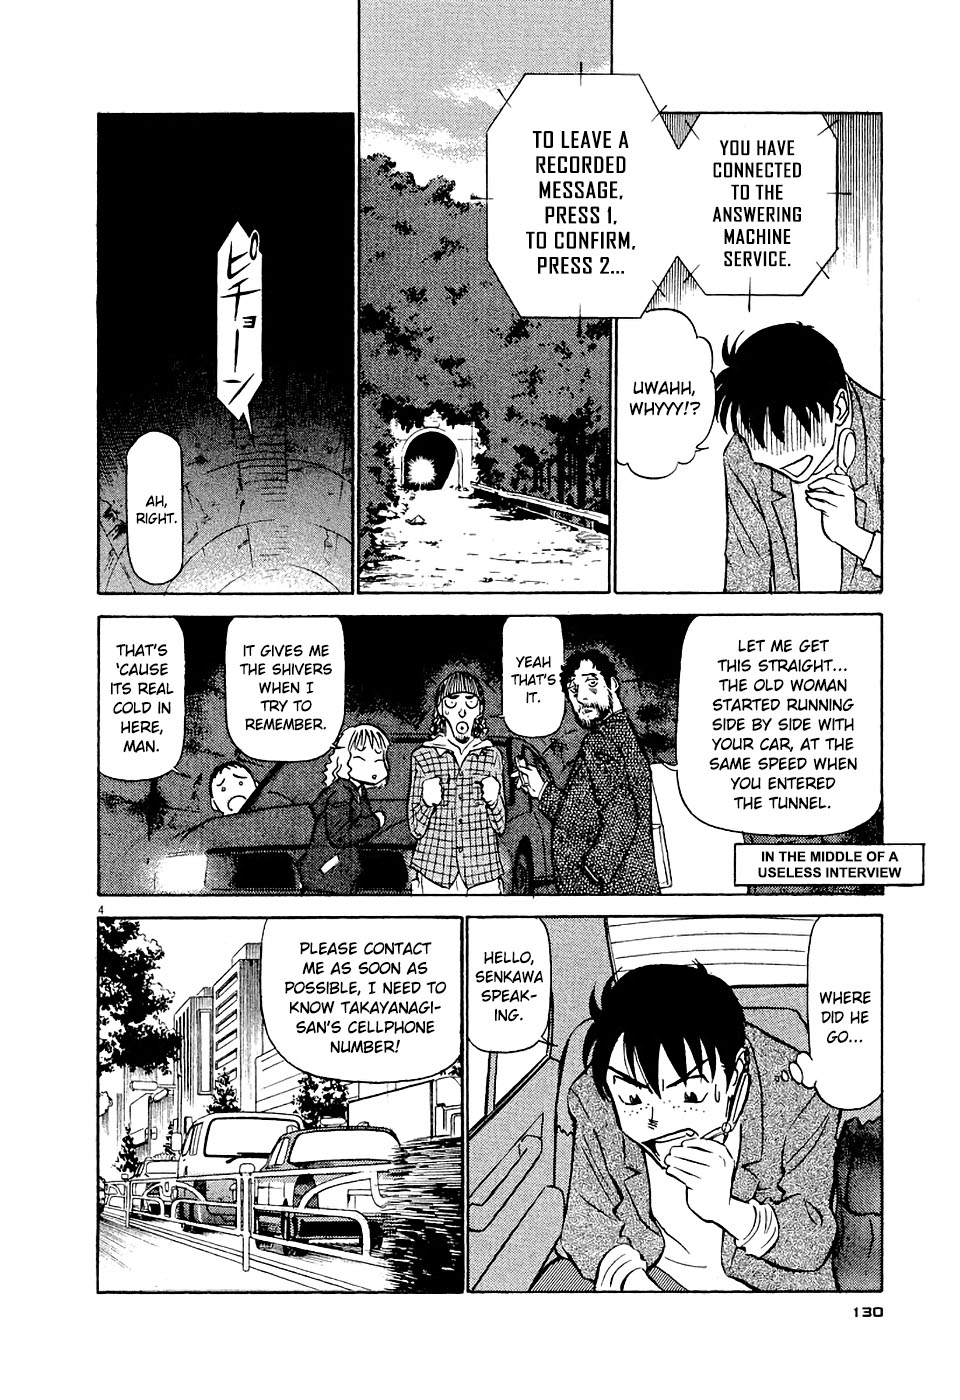 Birdy the Mighty Evolution Vol. 1 Ch. 7 Wake Up #7